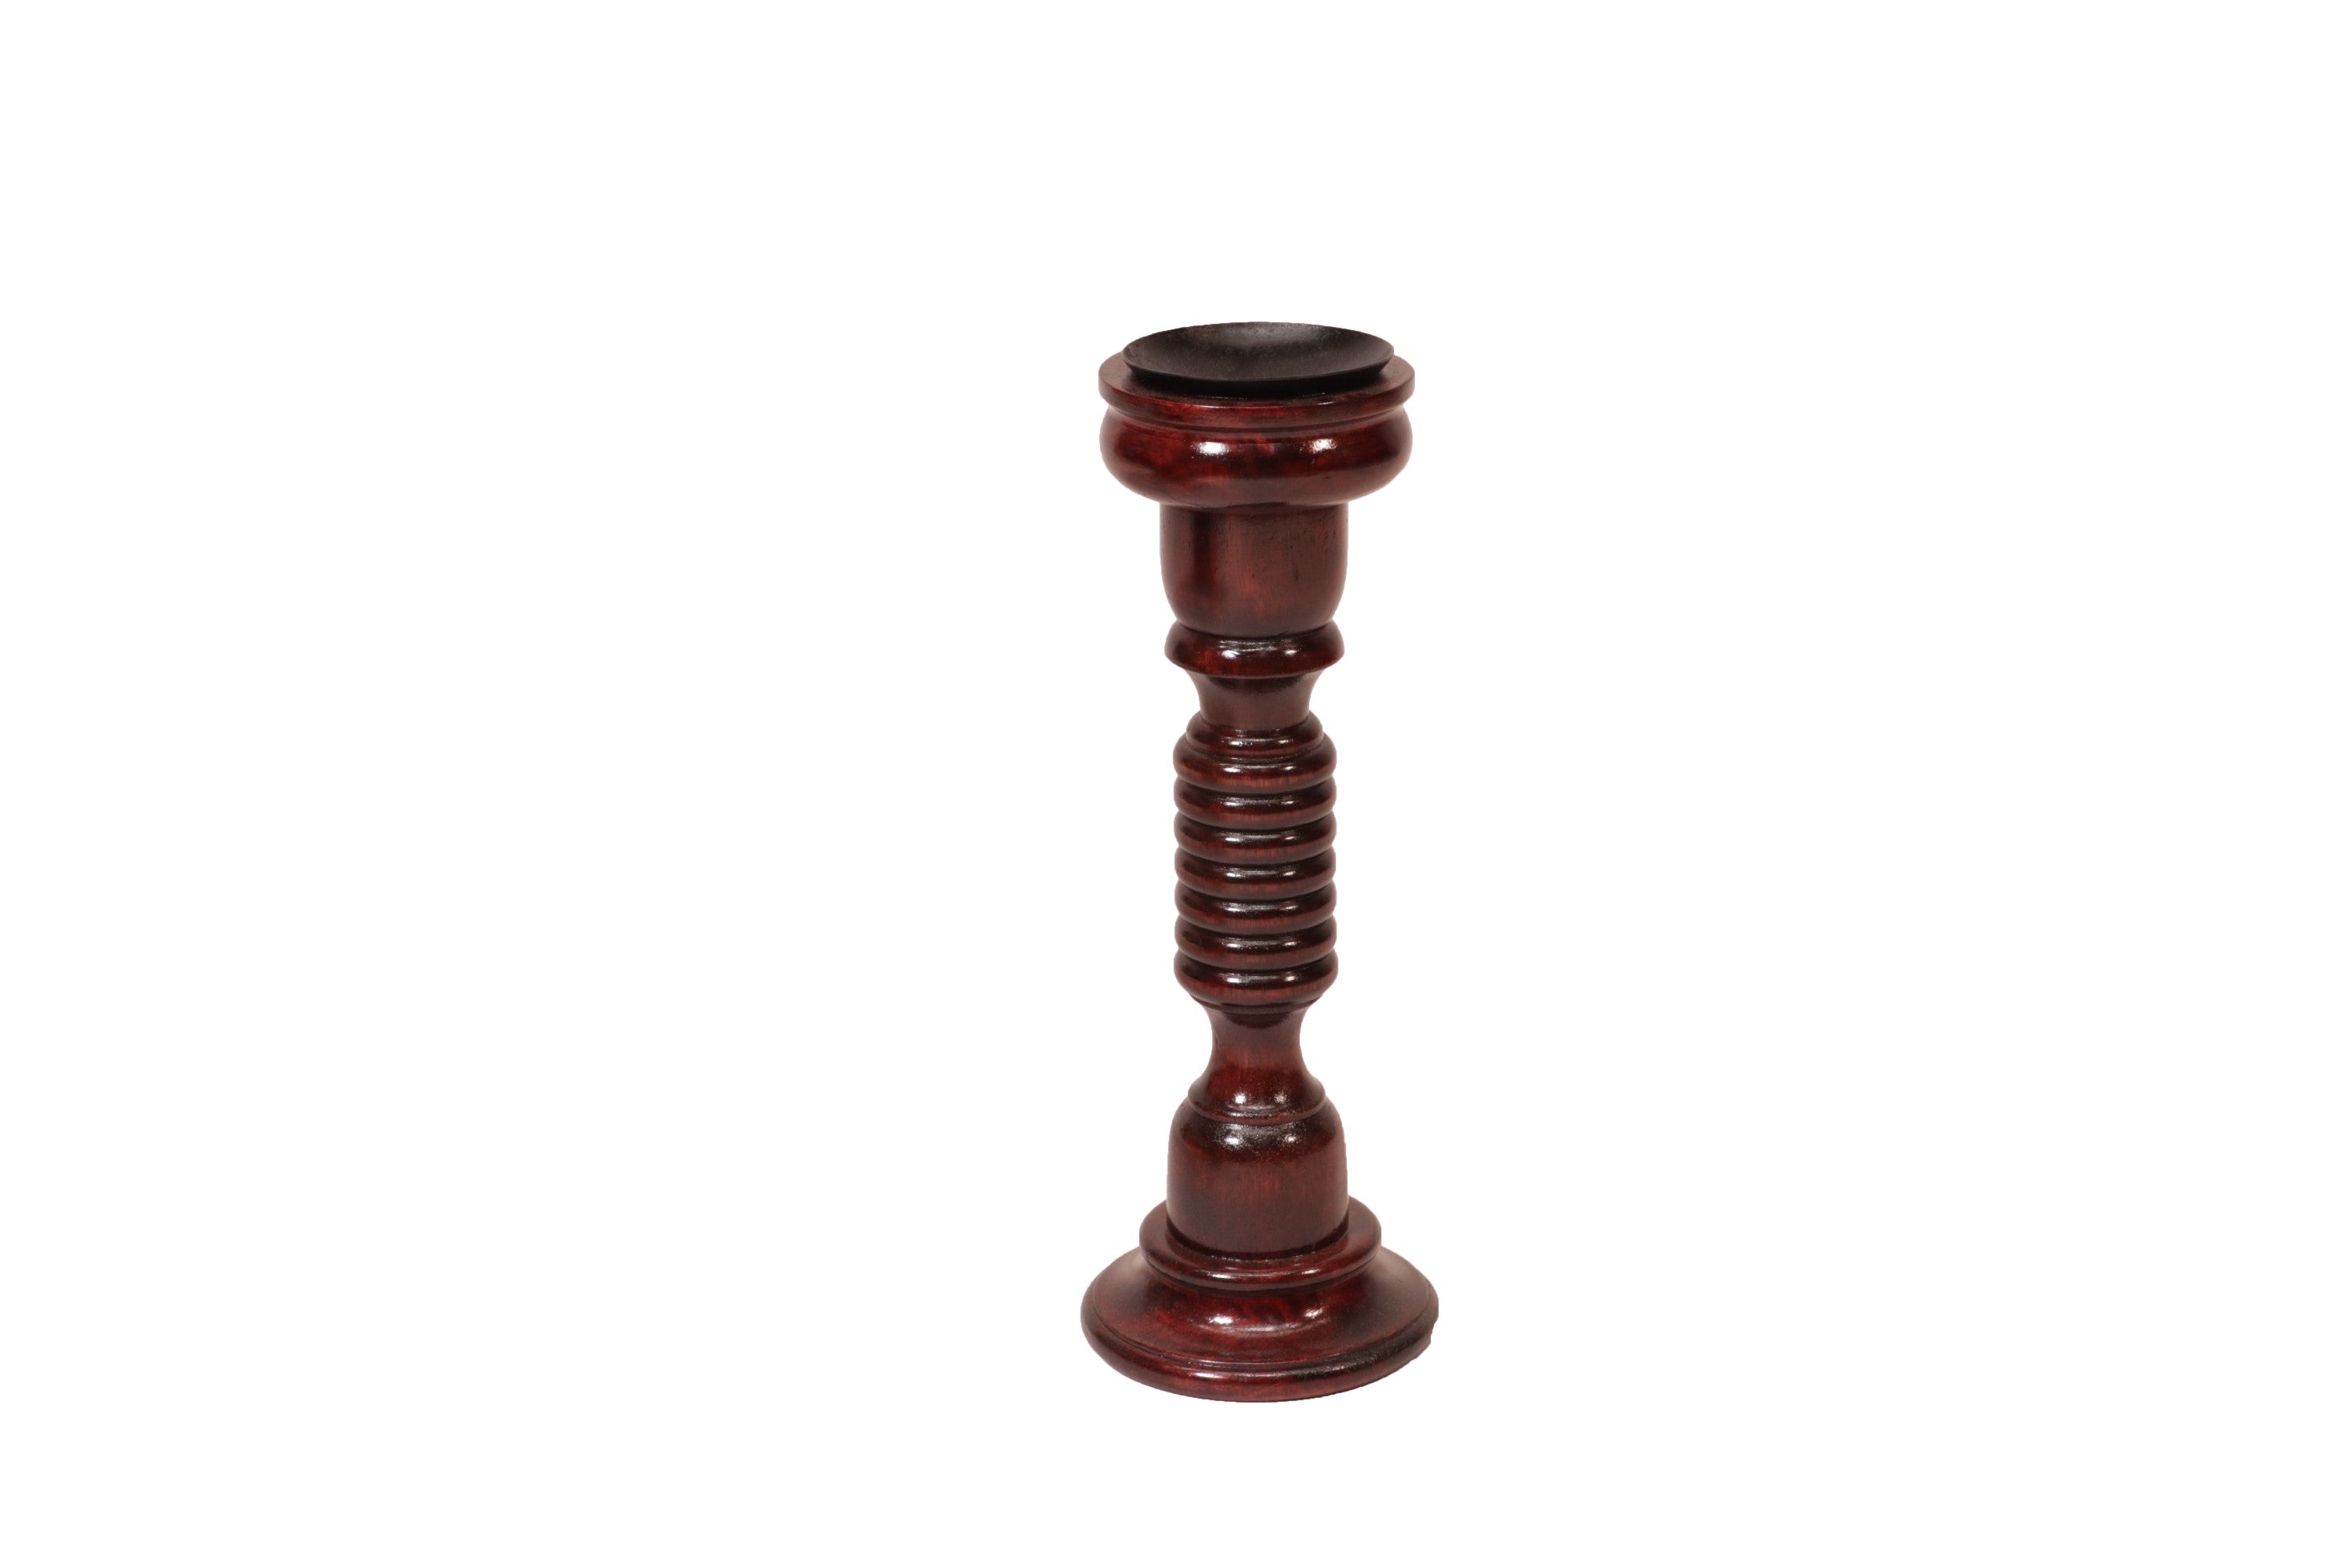 Wooden Risen Ring Candle Holder Candle Holder